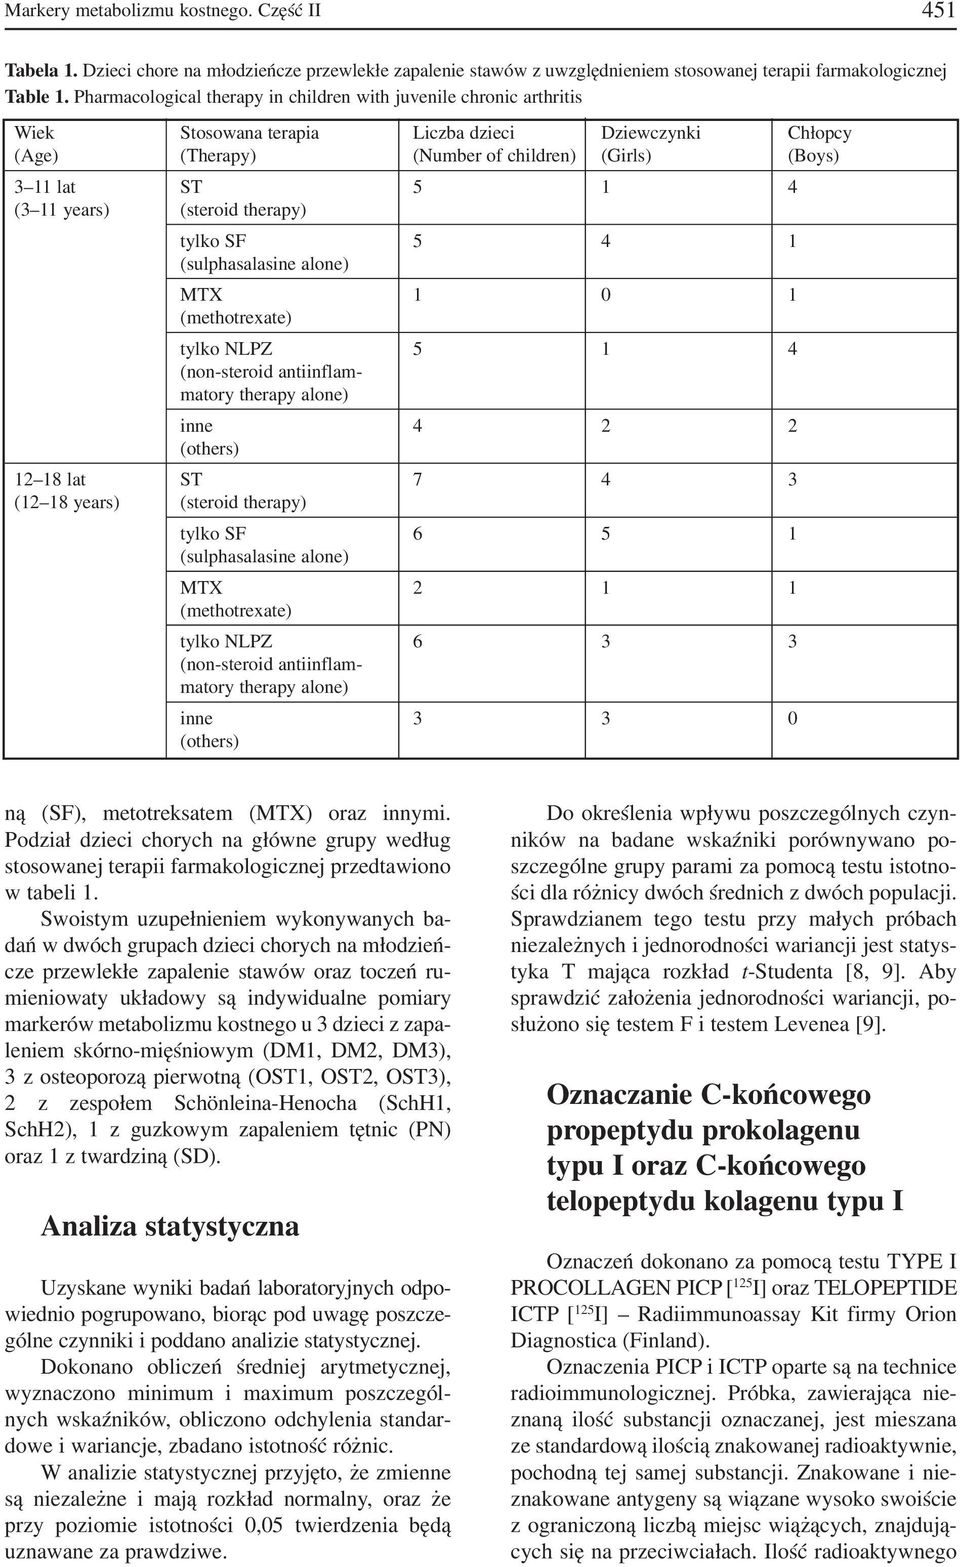 therapy) tylko SF 5 4 1 (sulphasalasine alone) MTX 1 0 1 (methotrexate) tylko NLPZ 5 1 4 (non steroid antiinflam matory therapy alone) inne 4 2 2 (others) 12 18 lat ST 7 4 3 (12 18 years) (steroid